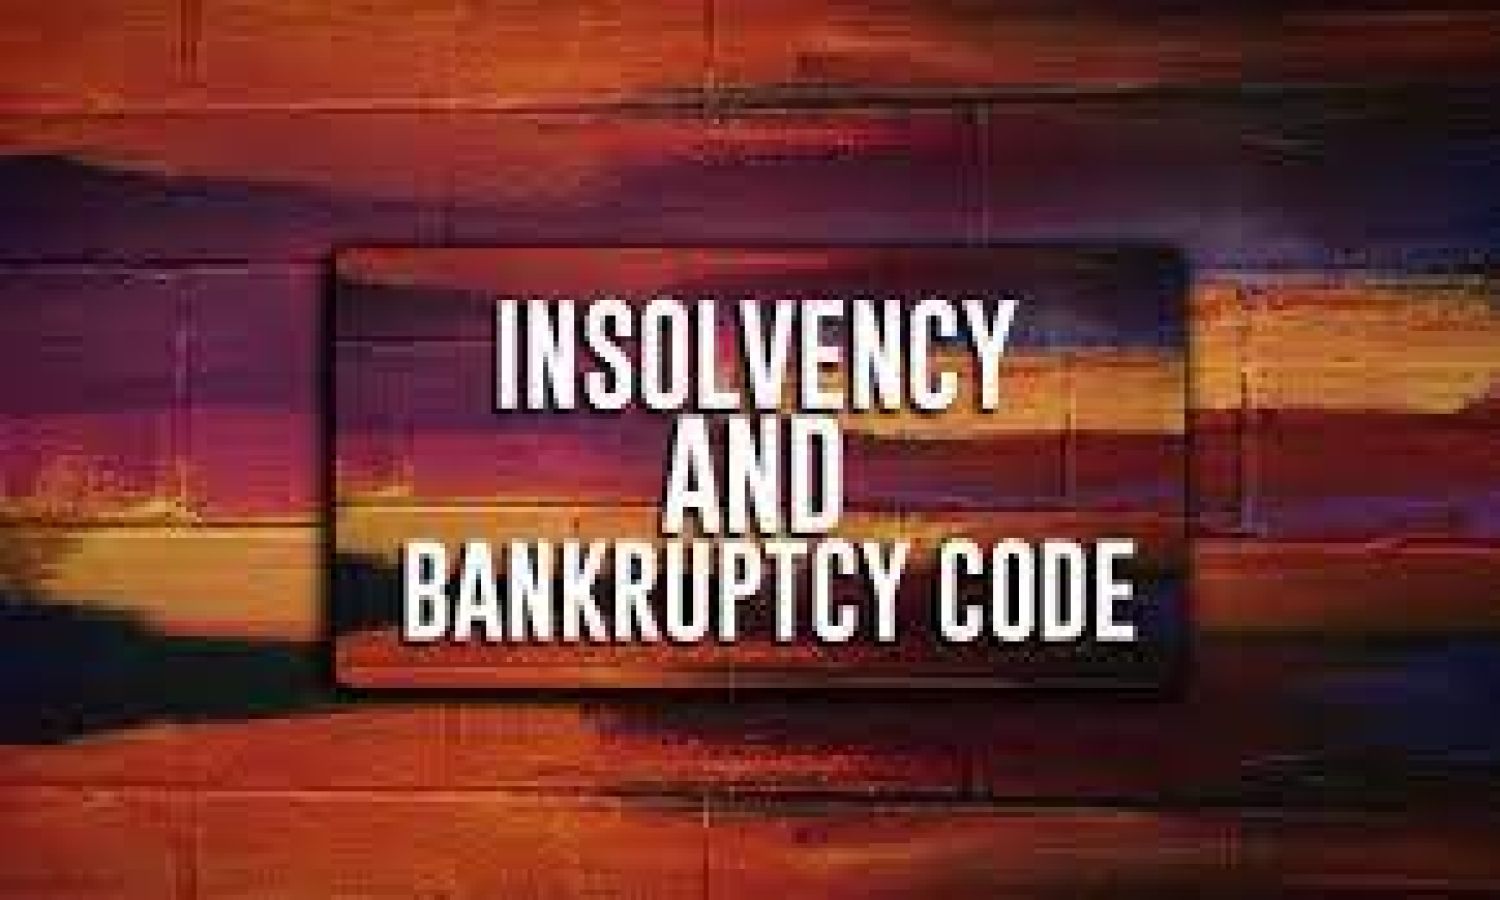 Summary of Importants Penalties on Insolvency & Bankruptcy Code